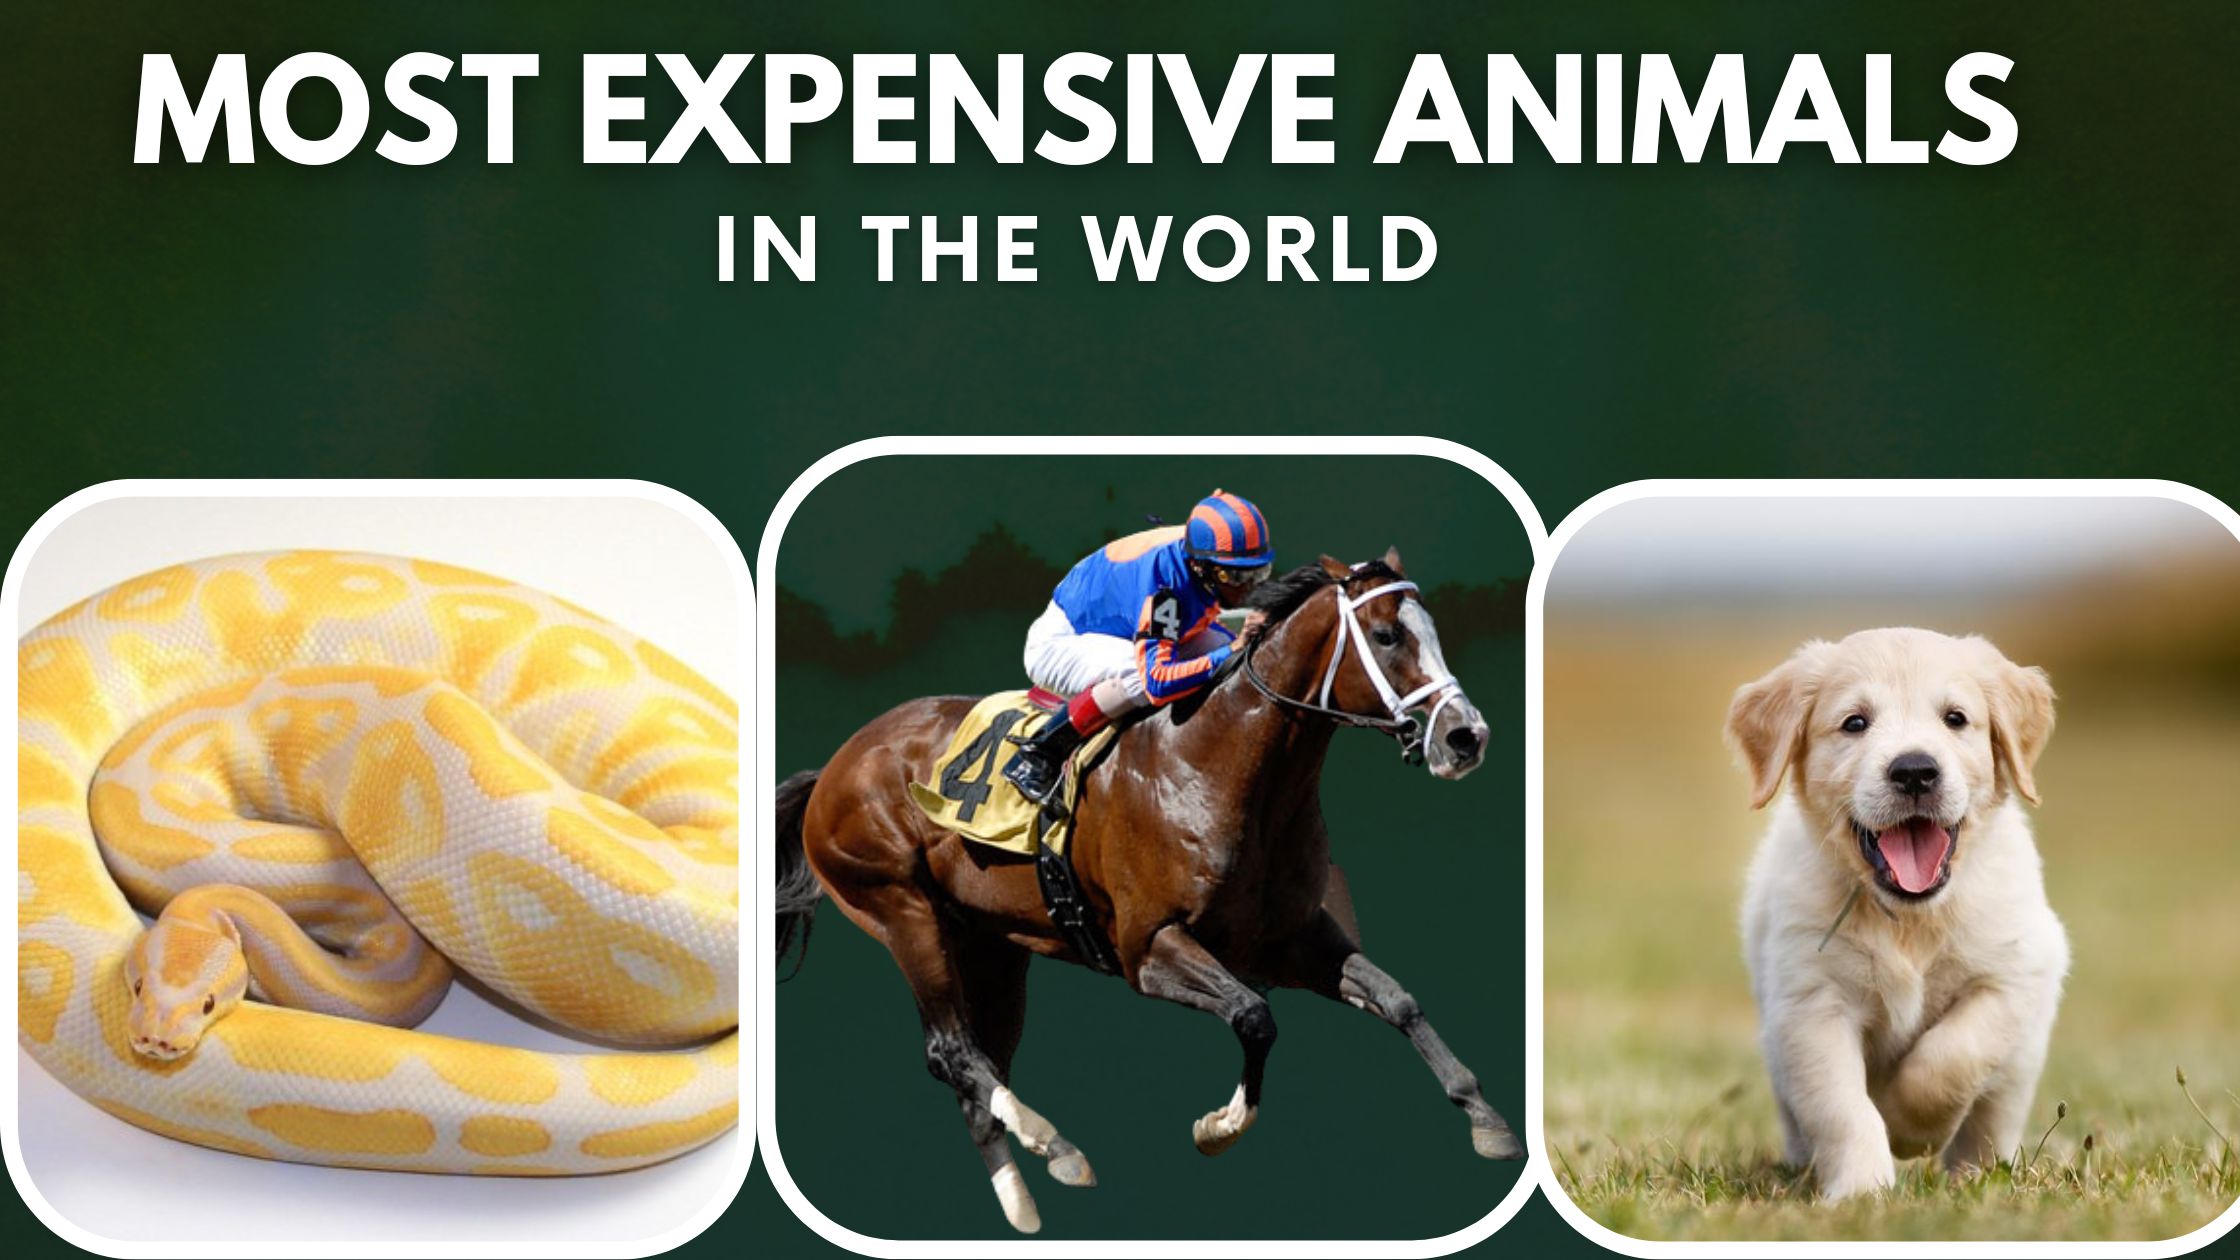 Top 10 Most Expensive Animals In The World (2022)